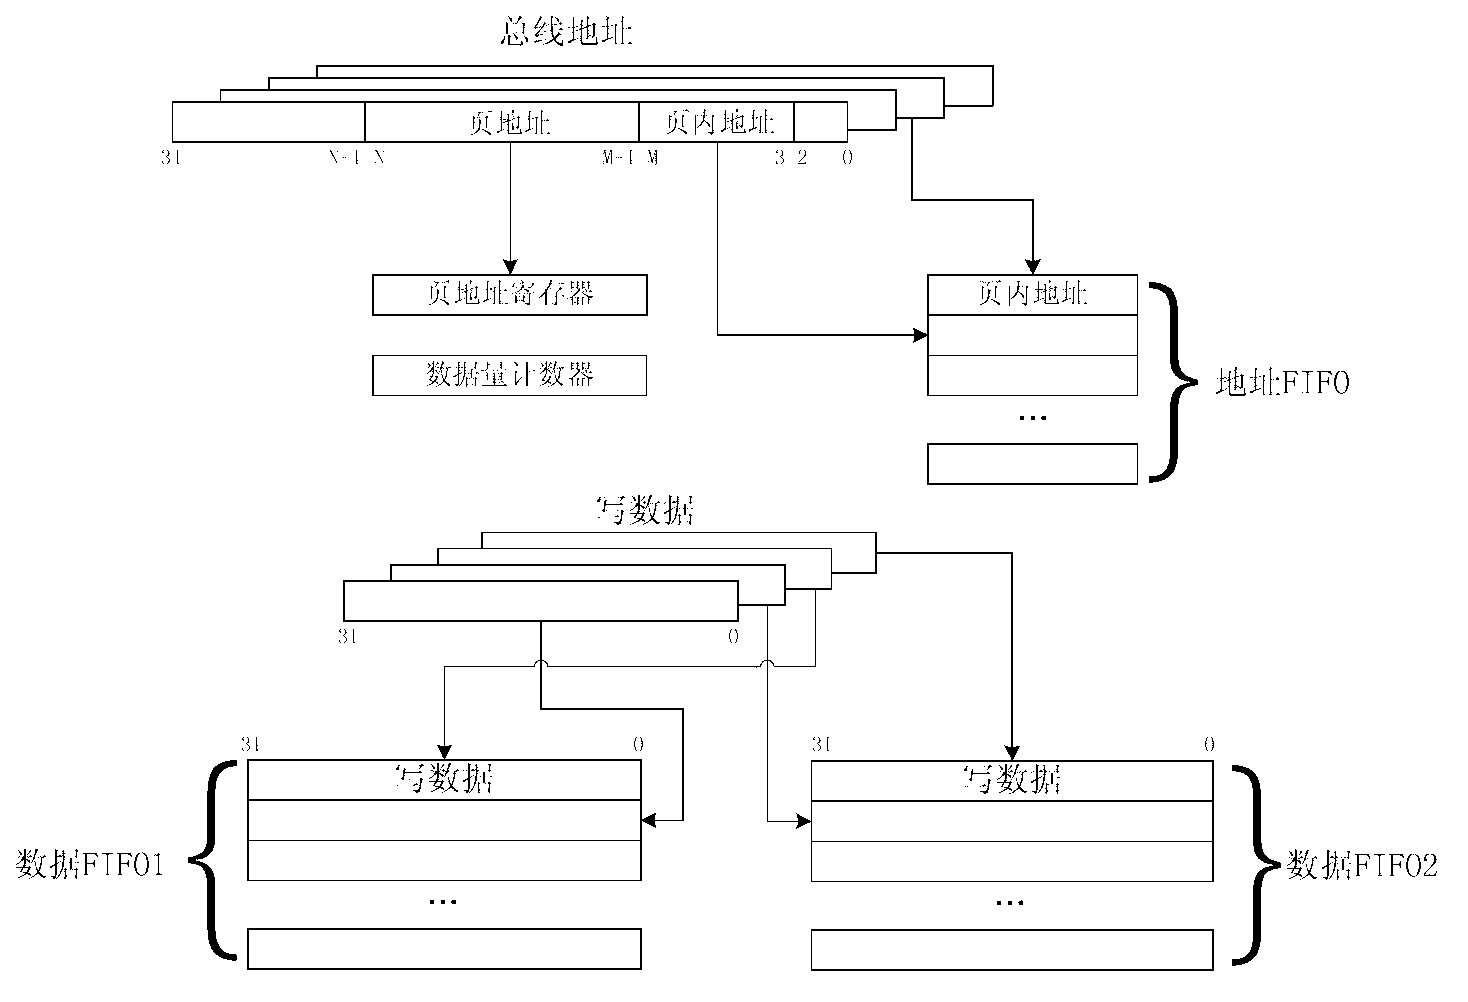 Universal nonvolatile memory control device for system on chip